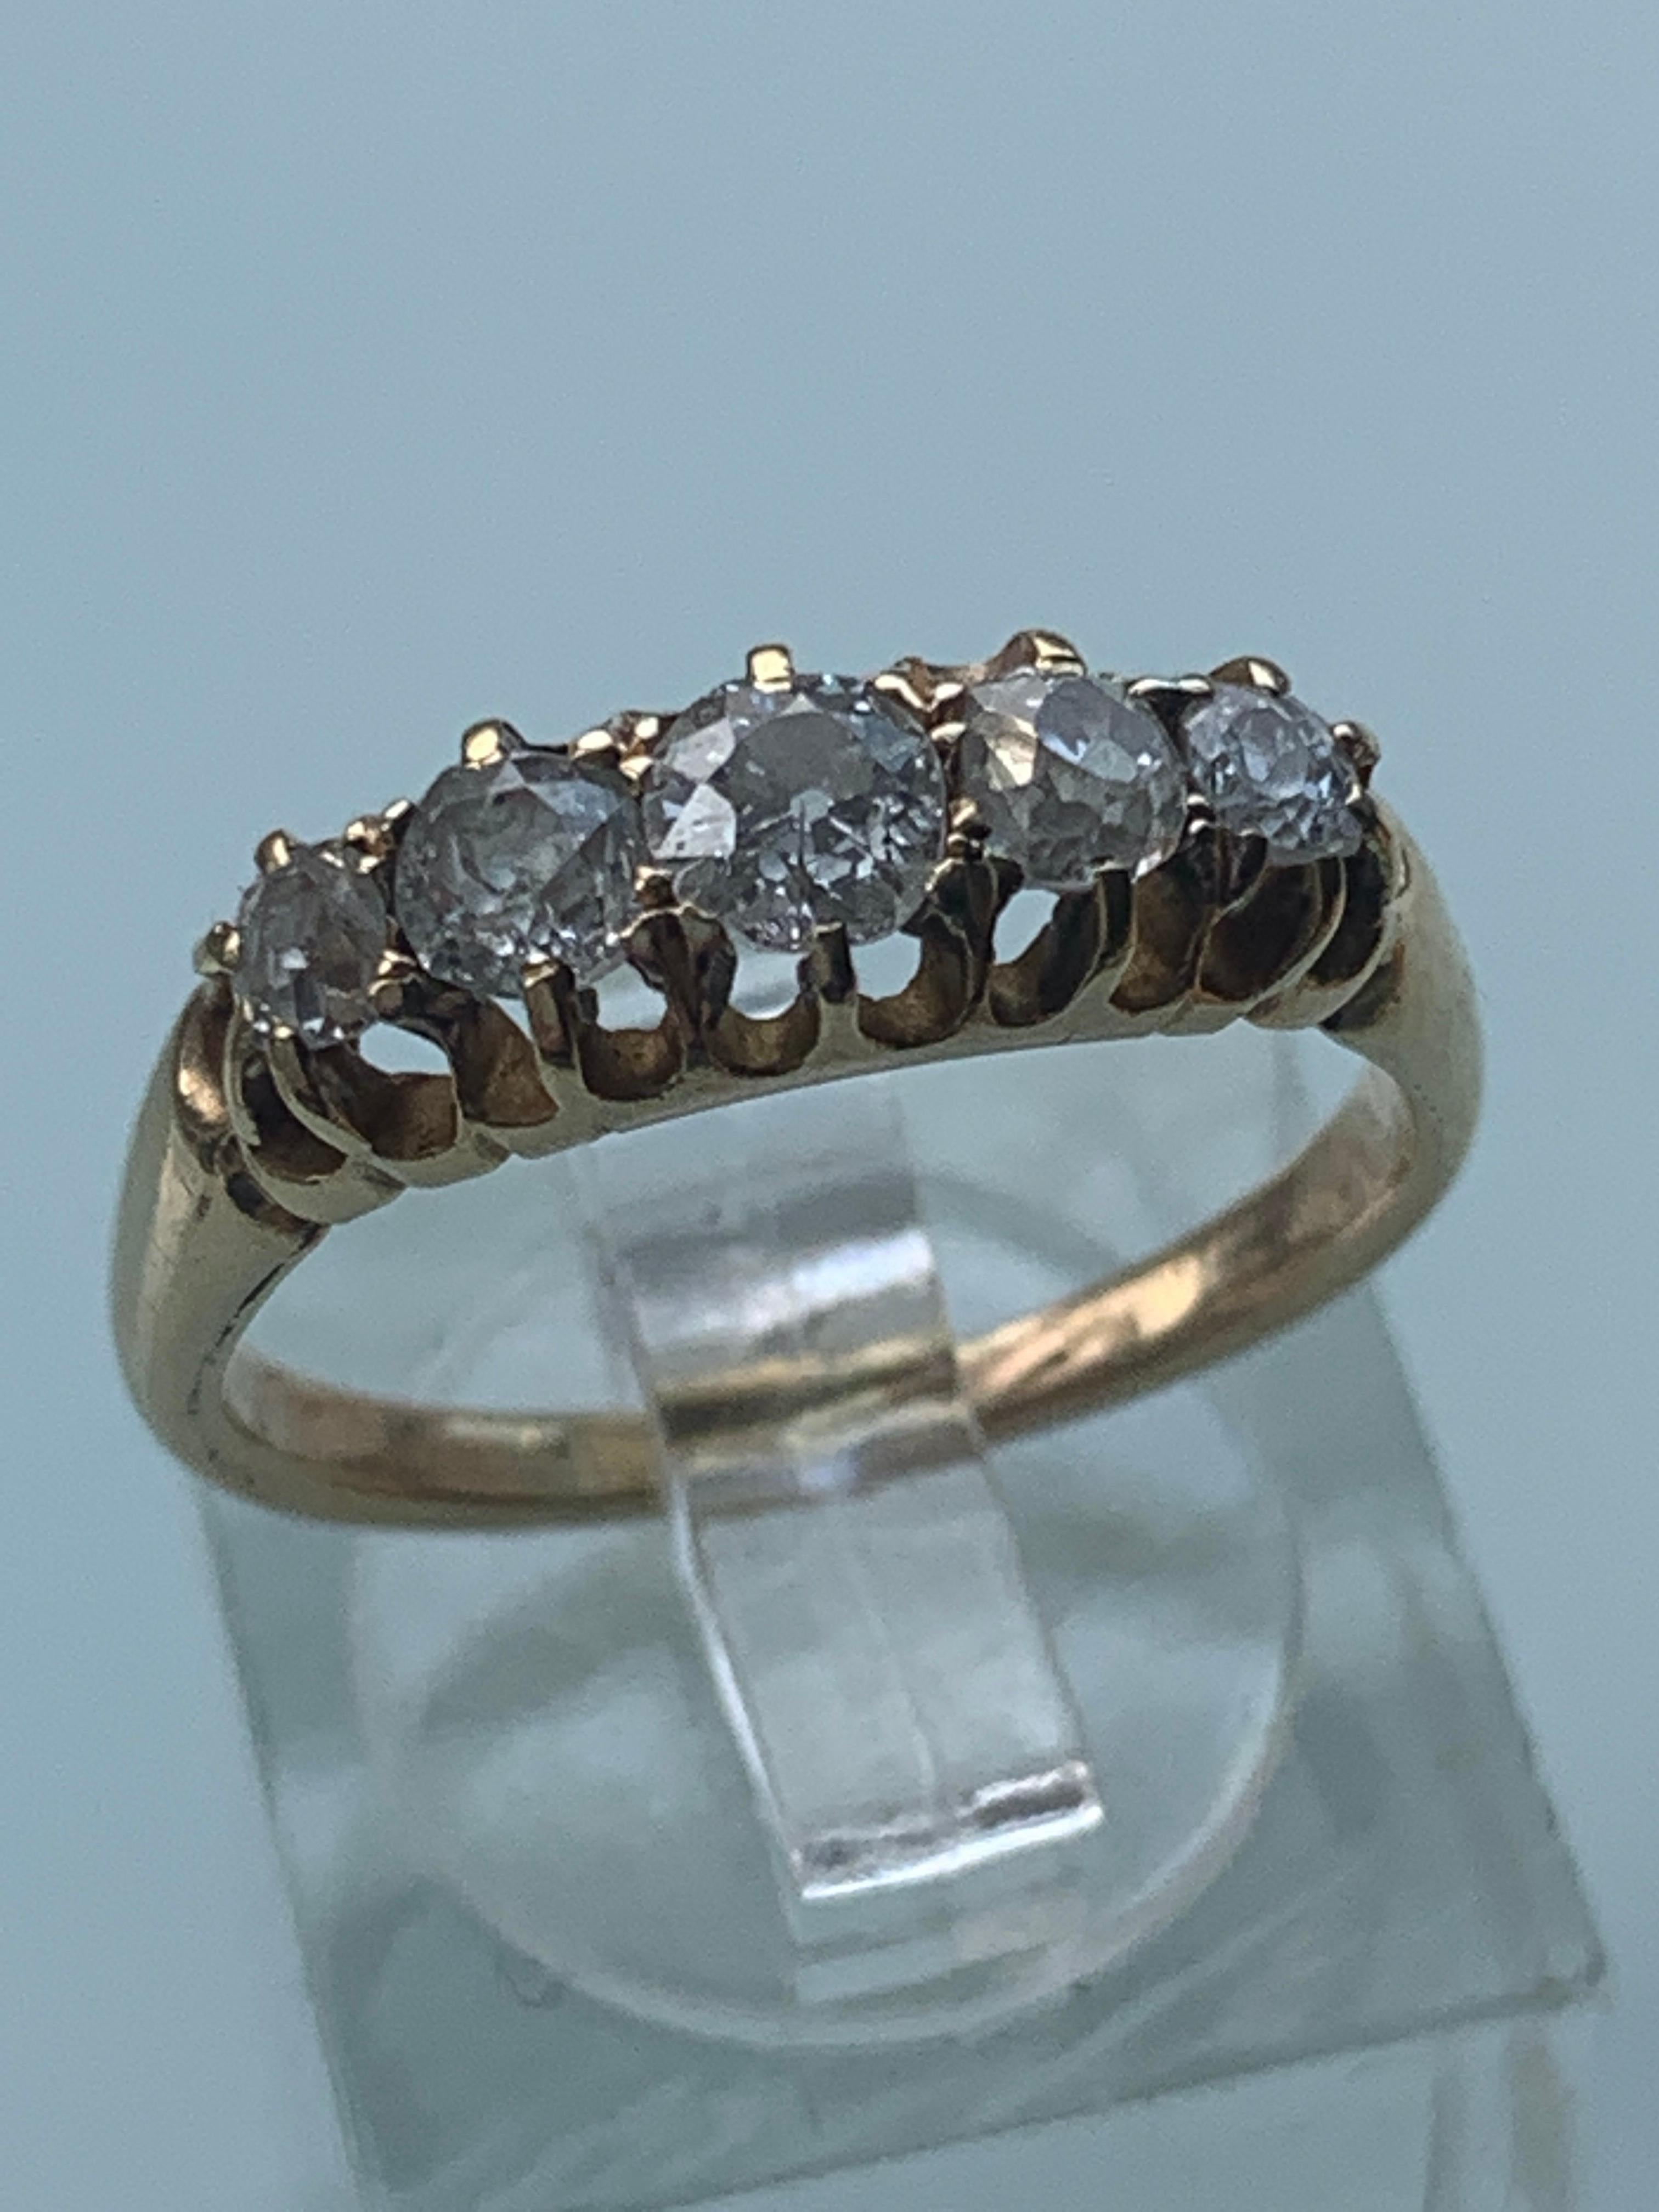 18ct Gold Victorian Diamond Ring 
0.7 Carats approx
Comprising of  Five Old Mine Cut Solitaires
in a secure 18ct 750 Gold Ring
Band is un hallmarked or stamped

